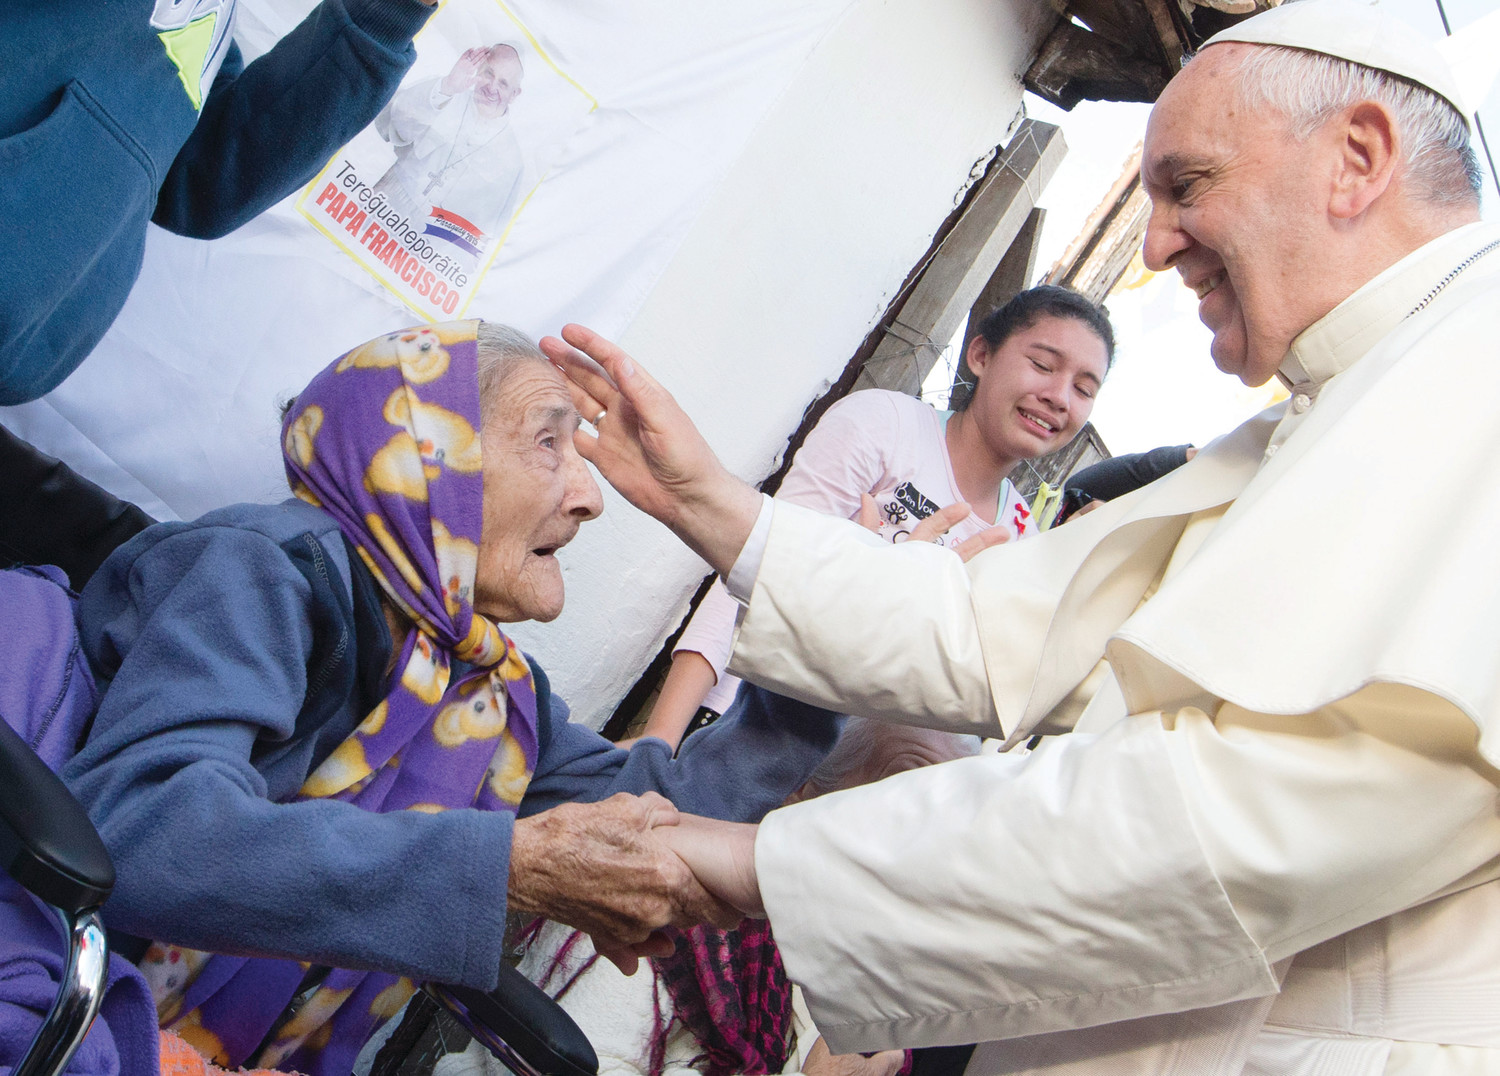 Pope Francis greets an elderly woman as he meets with people of the Banado Norte neighborhood in Asuncion, Paraguay, in this July 12, 2015, file photo. The pope has shown special concern for the aged, the sick and those with disabilities.